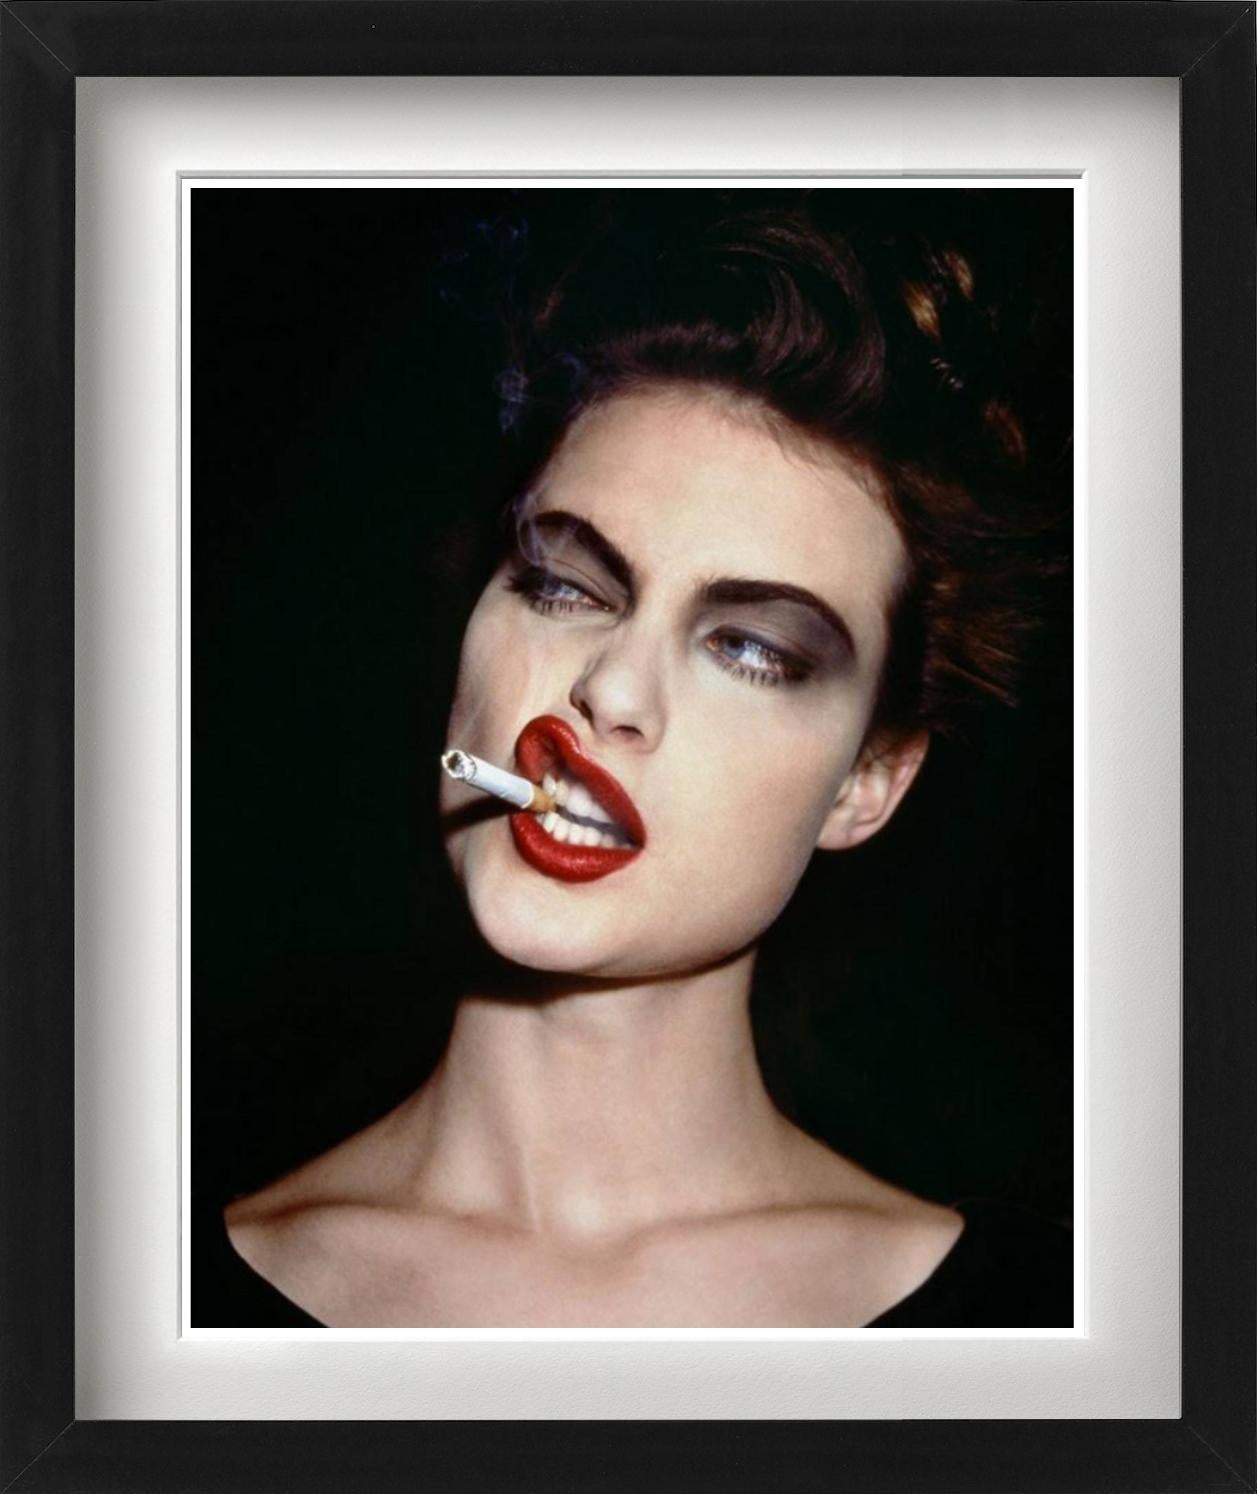 Shalom Harlow - portrait of the model smoking, fine art photography, 1995 - Photograph by Roxanne Lowit